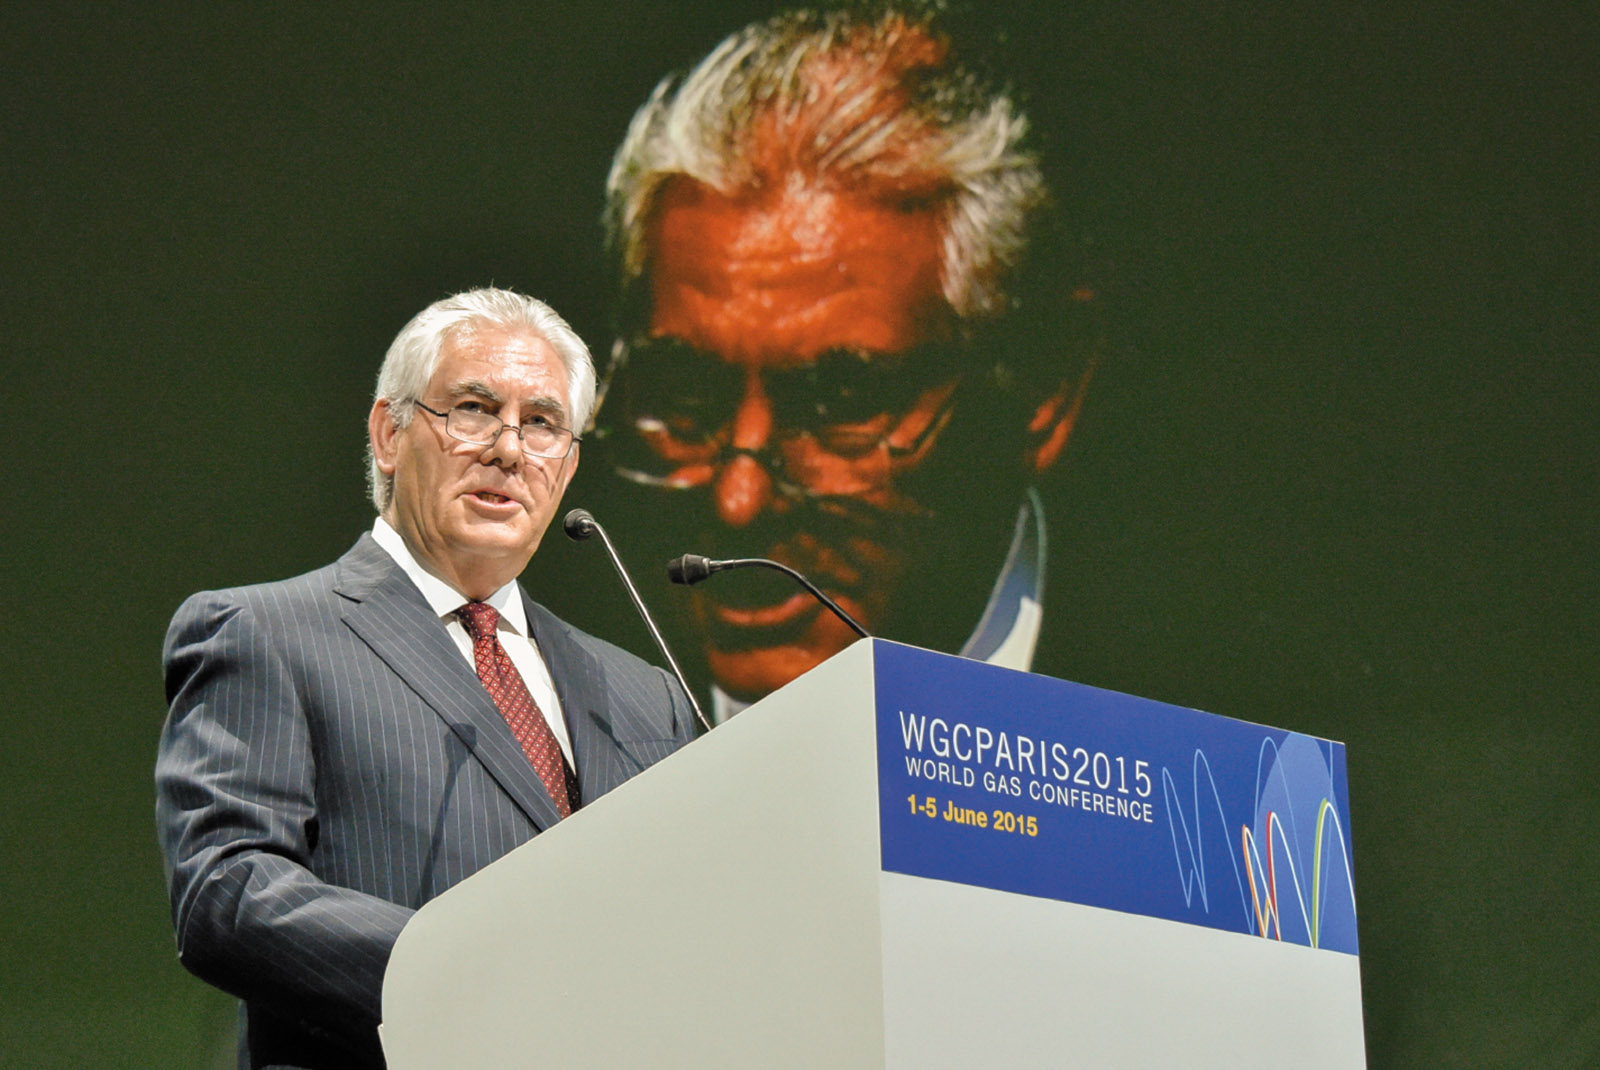 Rex Tillerson, CEO of ExxonMobil, at the World Gas Conference, Paris, June 2015